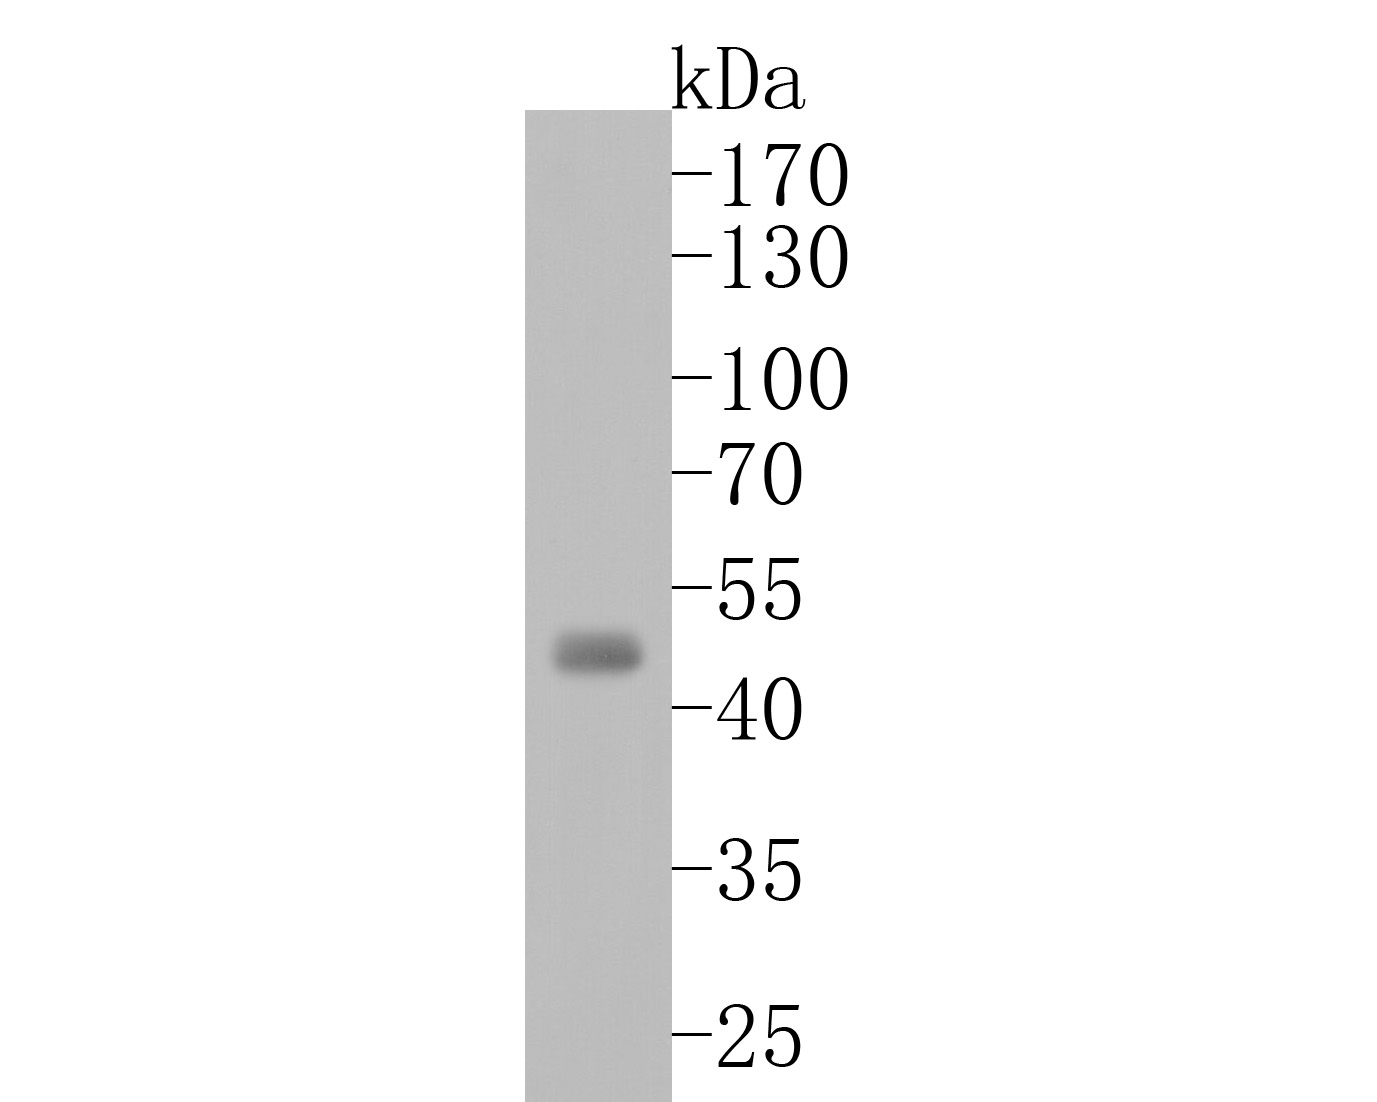 Western blot analysis of Aurora A on K562 cell lysates. Proteins were transferred to a PVDF membrane and blocked with 5% BSA in PBS for 1 hour at room temperature. The primary antibody (ET1609-22, 1/500) was used in 5% BSA at room temperature for 2 hours. Goat Anti-Rabbit IgG - HRP Secondary Antibody (HA1001) at 1:40,000 dilution was used for 1 hour at room temperature.